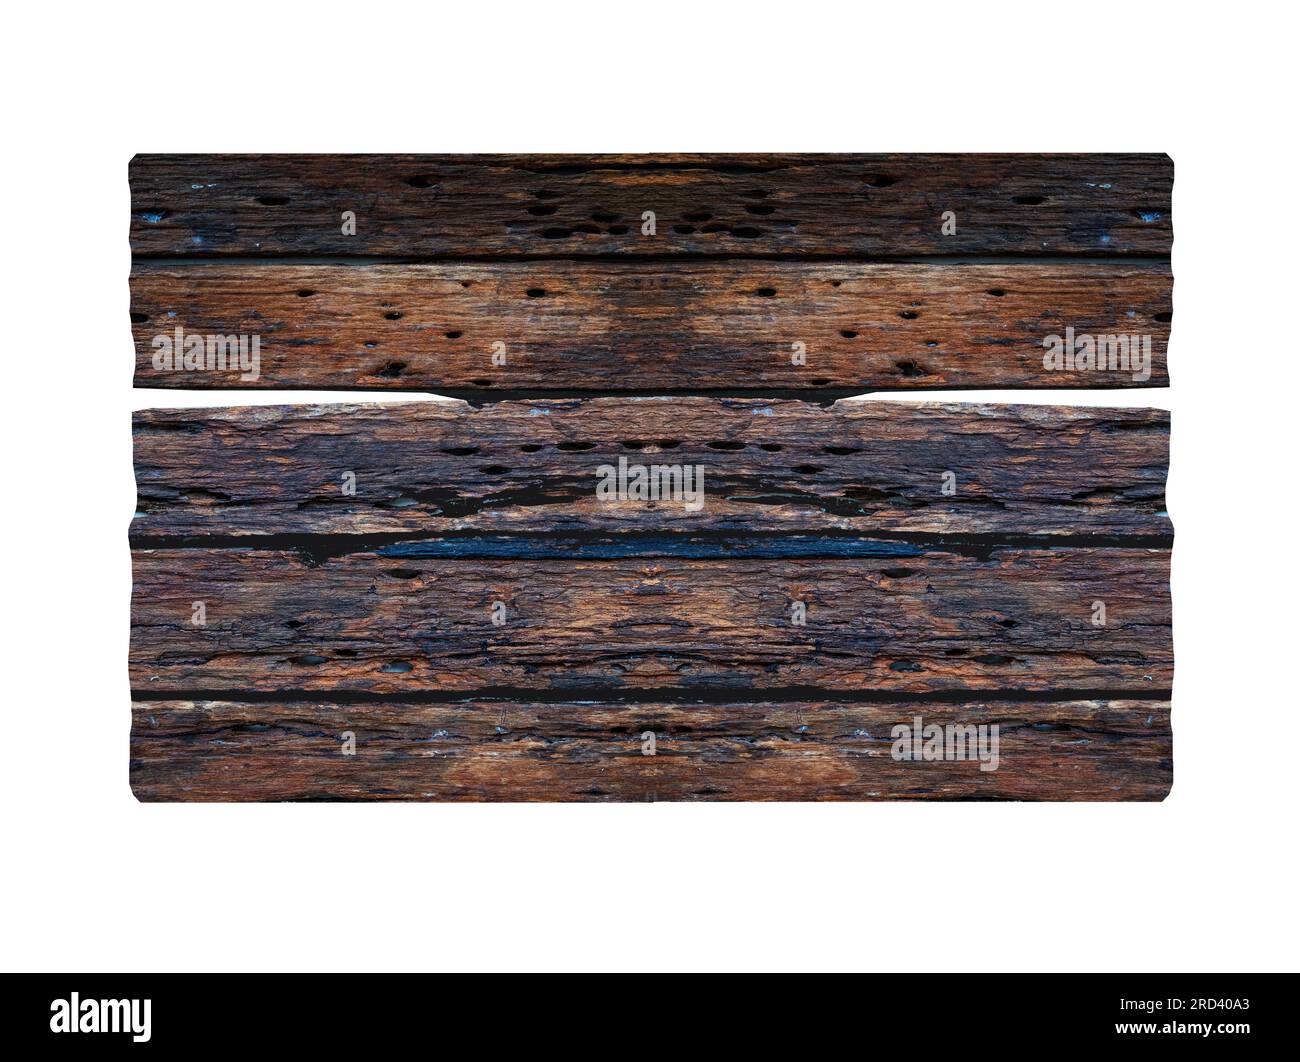 Dark brown antique plank frame background with tropical leaves and climbing vines on the edge of the plank. Stock Photo